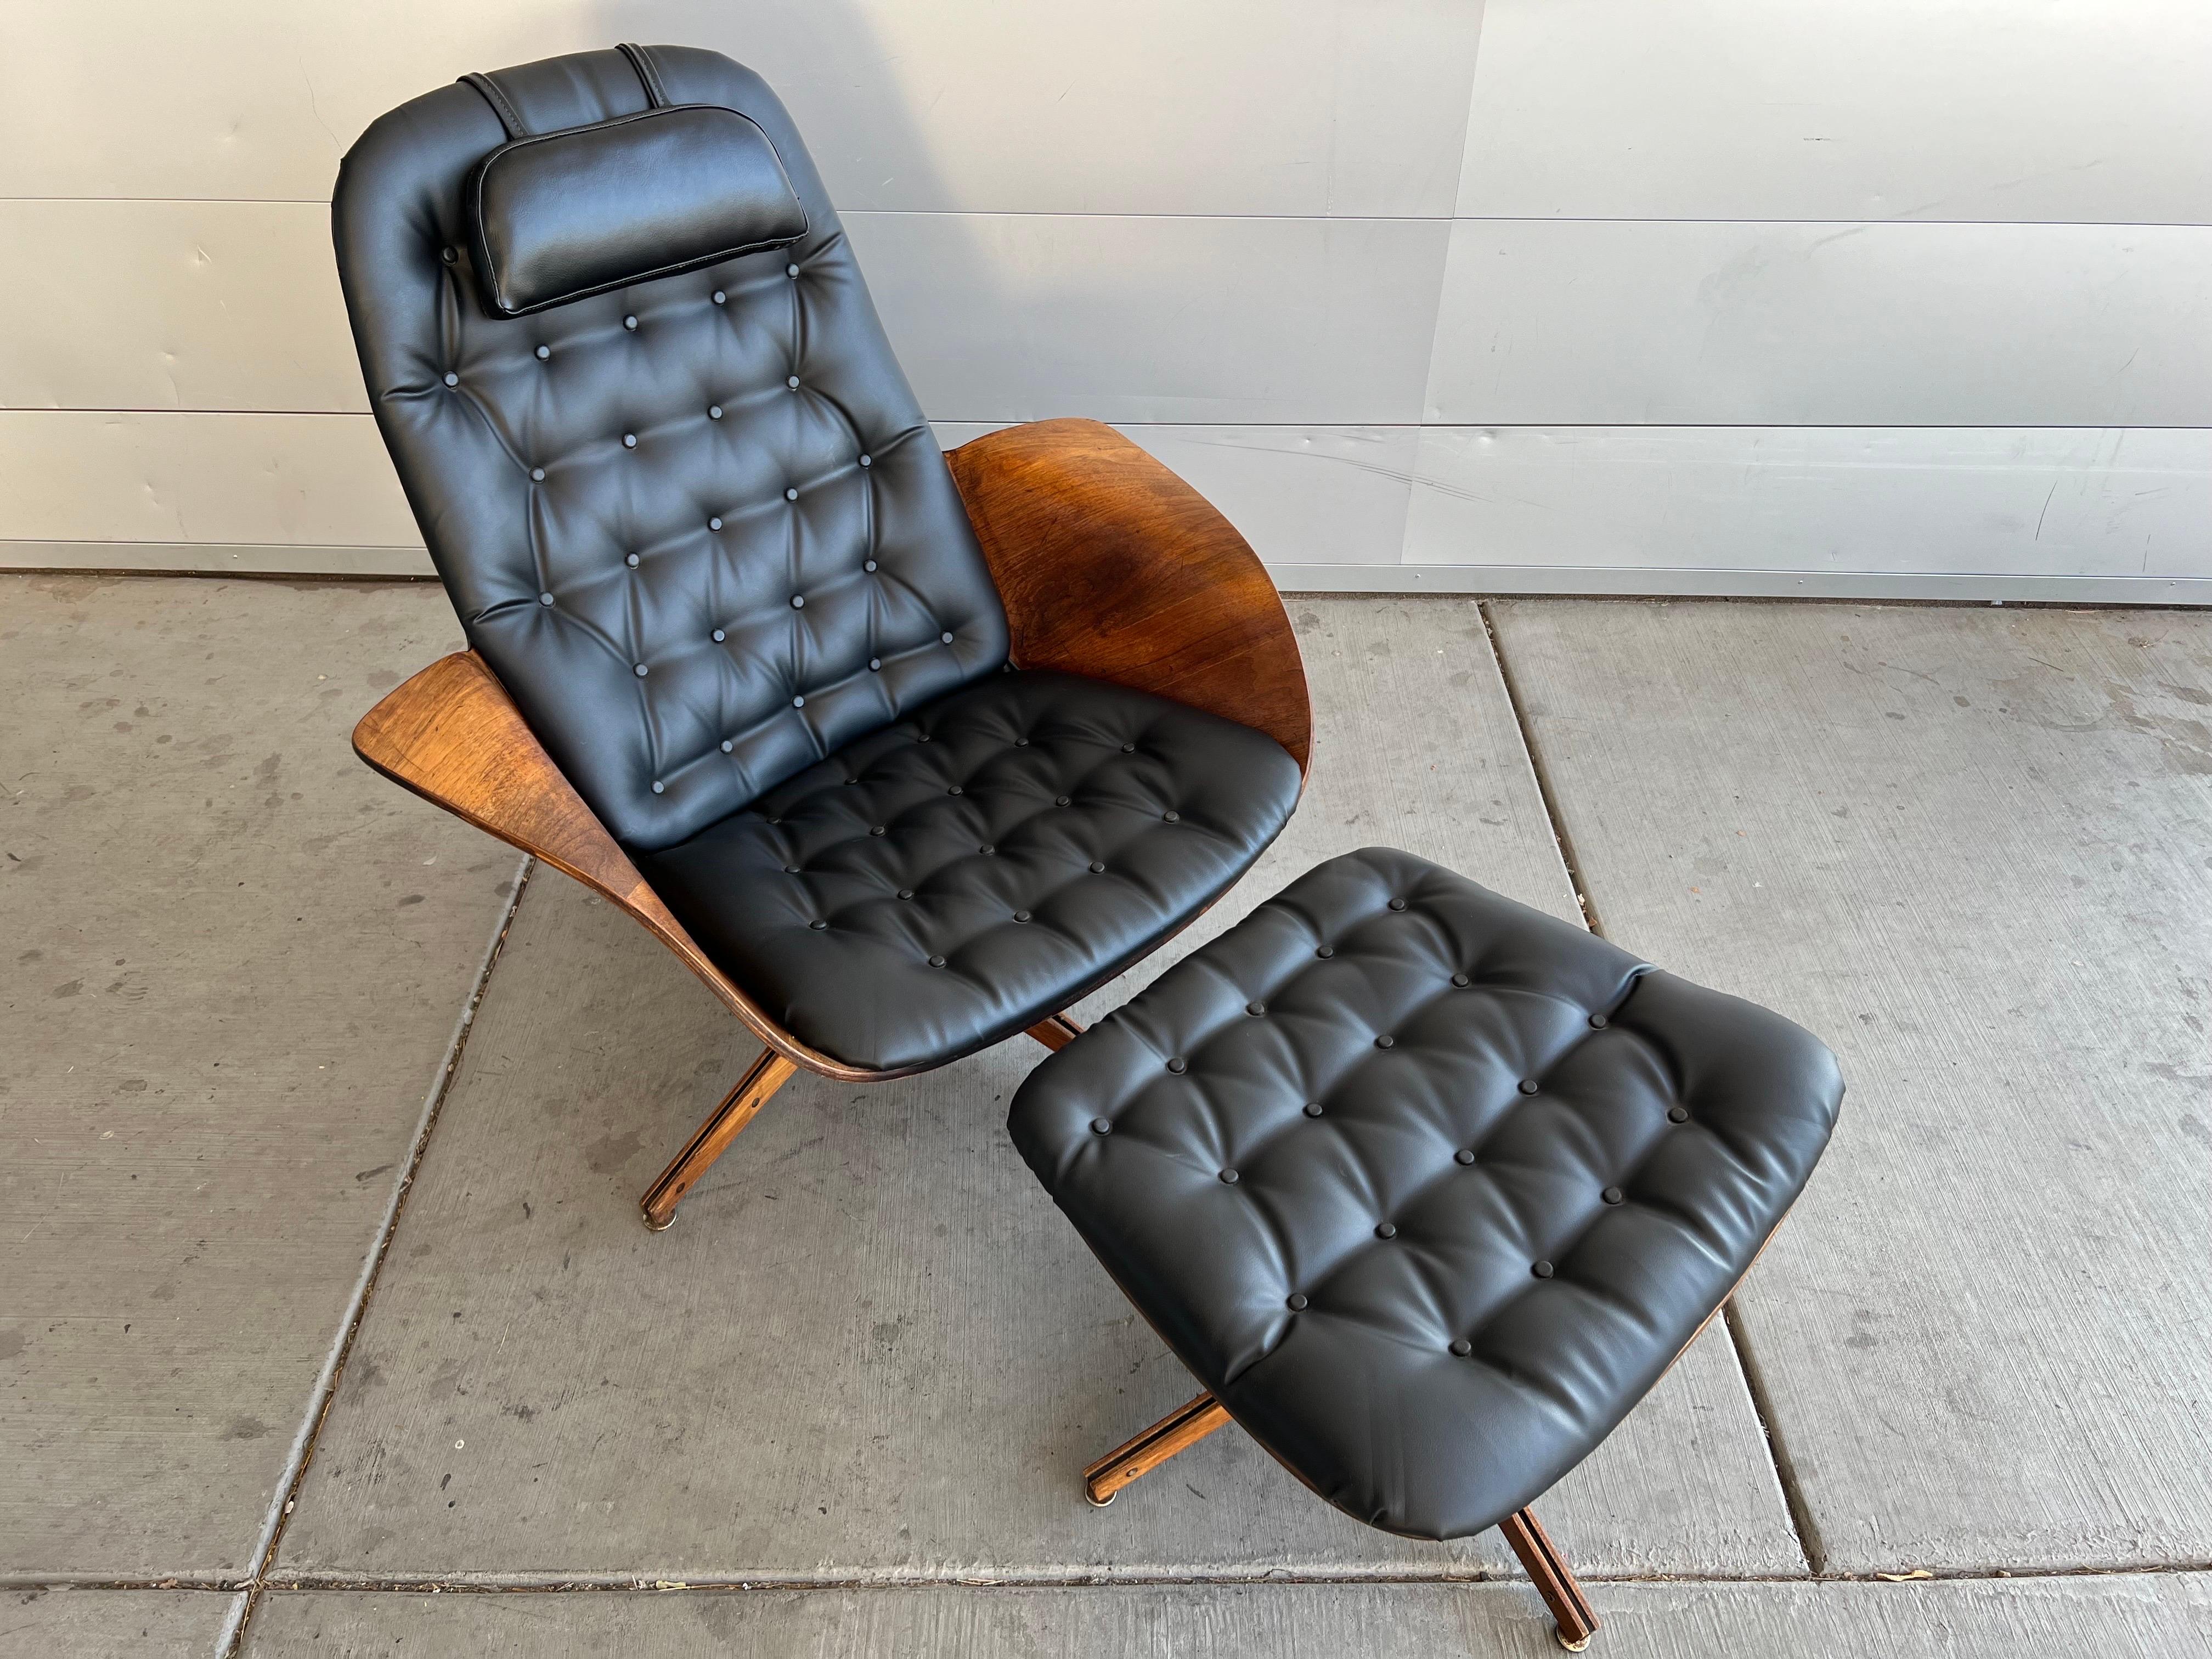 1960s vintage Mr. Chair and ottoman by George Mulhauser for Plycraft. This iconic mid century modern chair features sculptural bent walnut armrests and brand new black vinyl tufted upholstery. The chair and ottoman both swivel. The chair has a